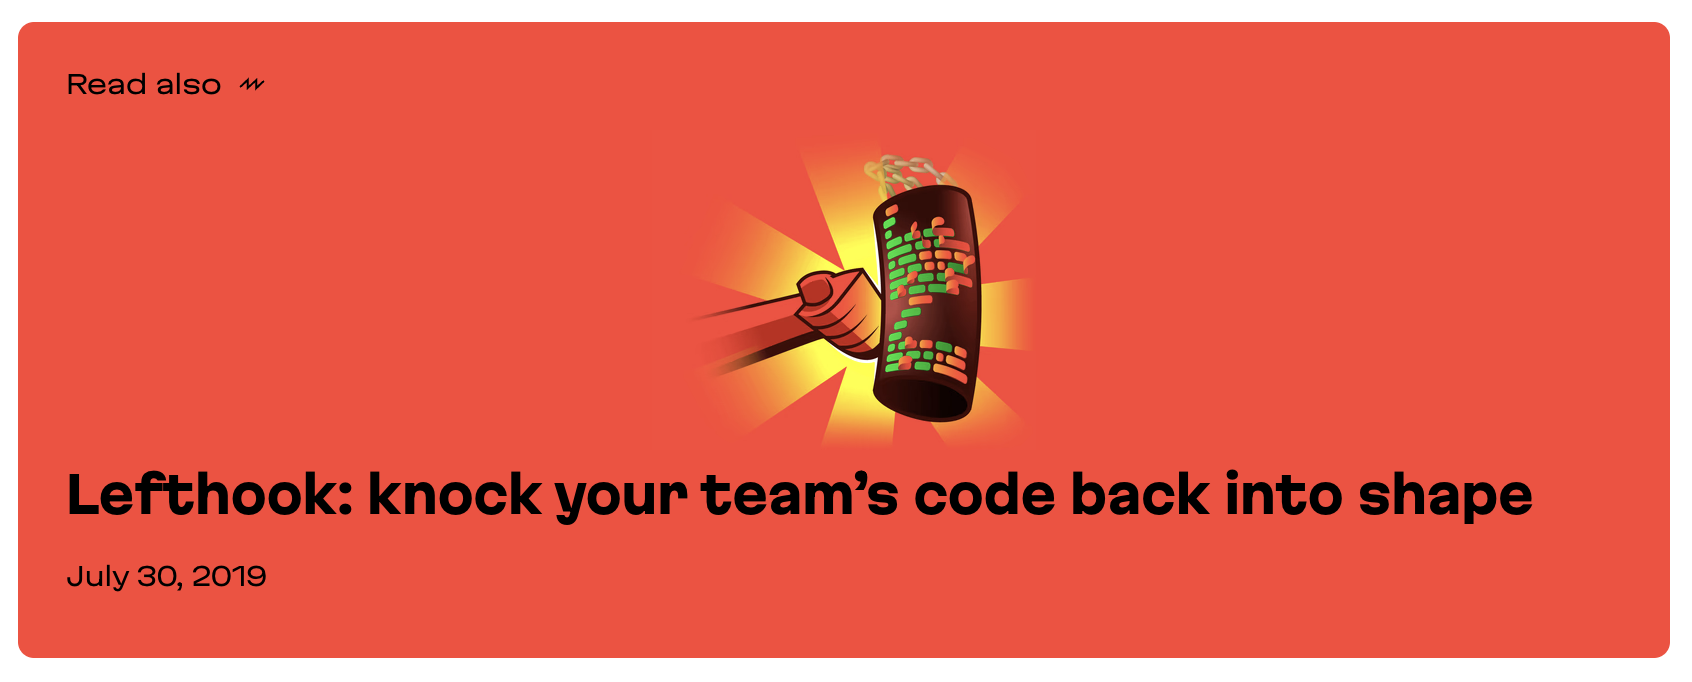 lefthook-knock-your-teams-code-back-into-shape.png